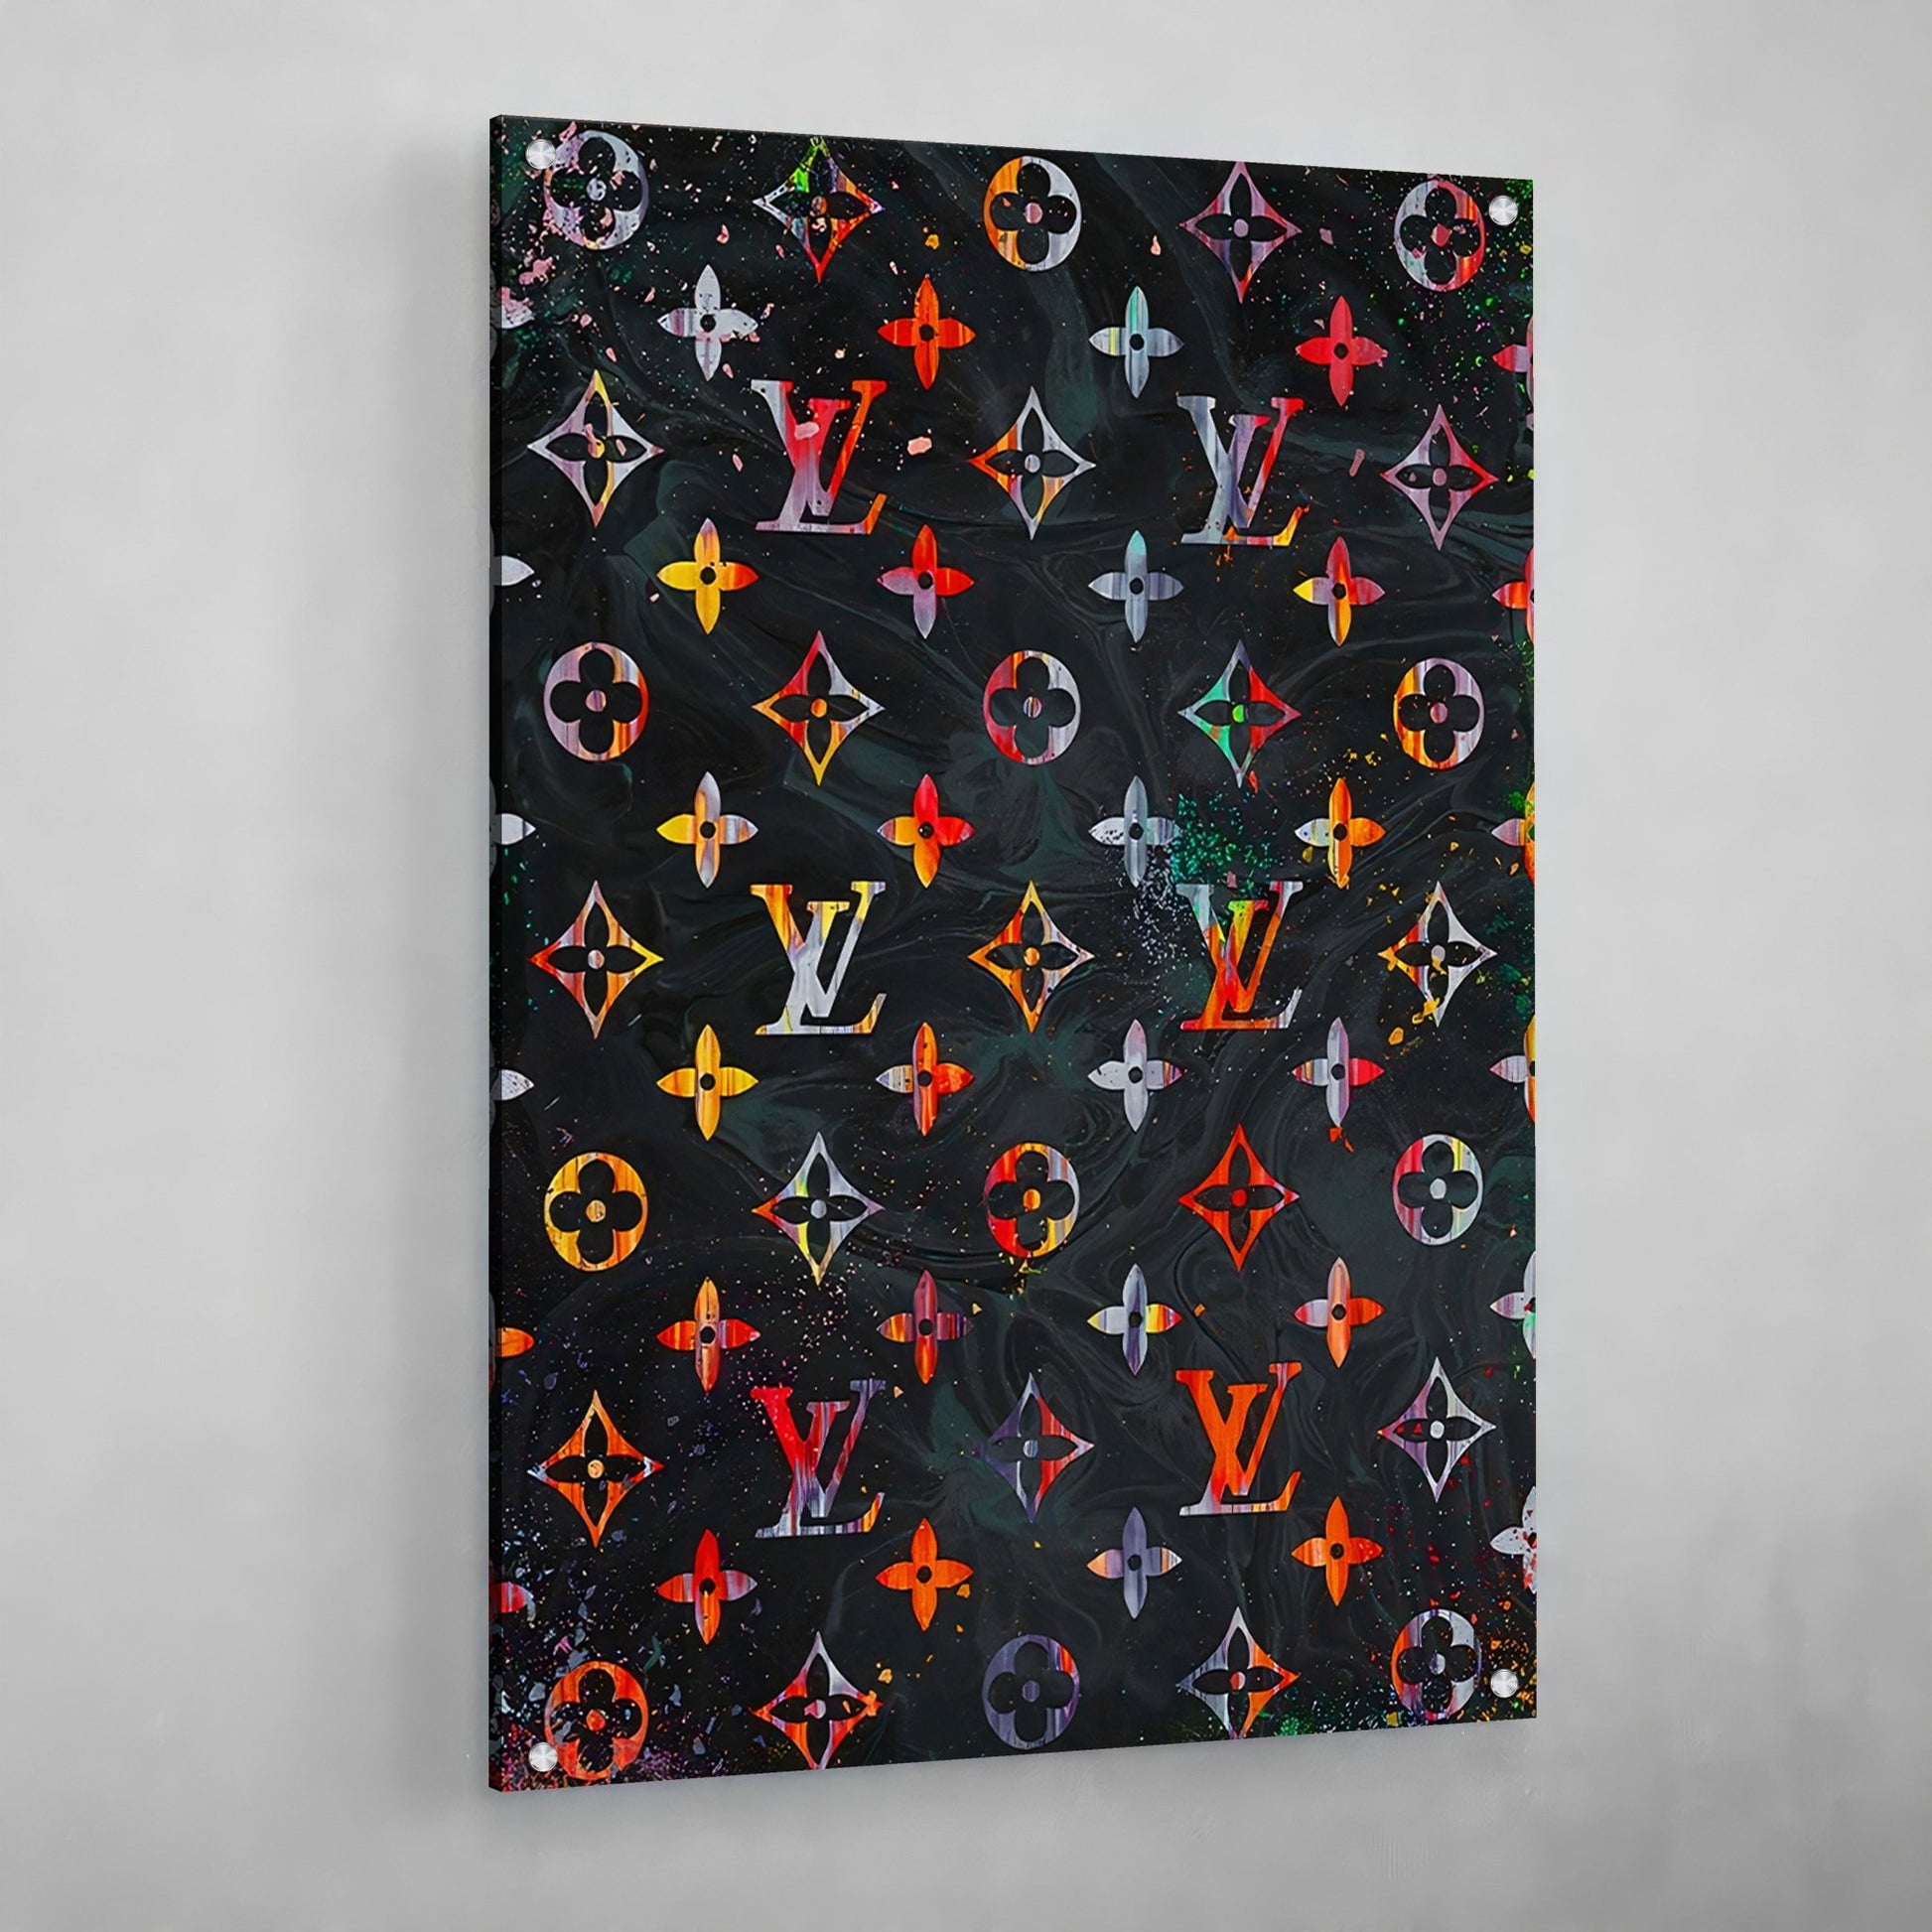 Louis Vuitton Logo Pattern V4 Wall Decal Home Decor Bedroom Room